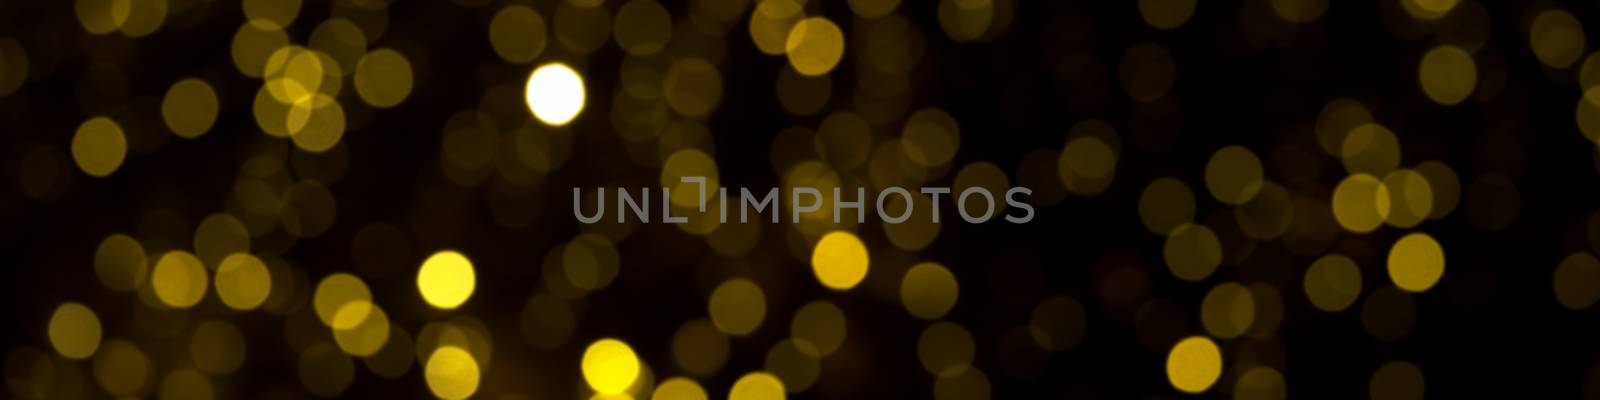 defocused gold christmas lights on dark background. yellow bokeh circles on black backdrop, christmas background by PhotoTime